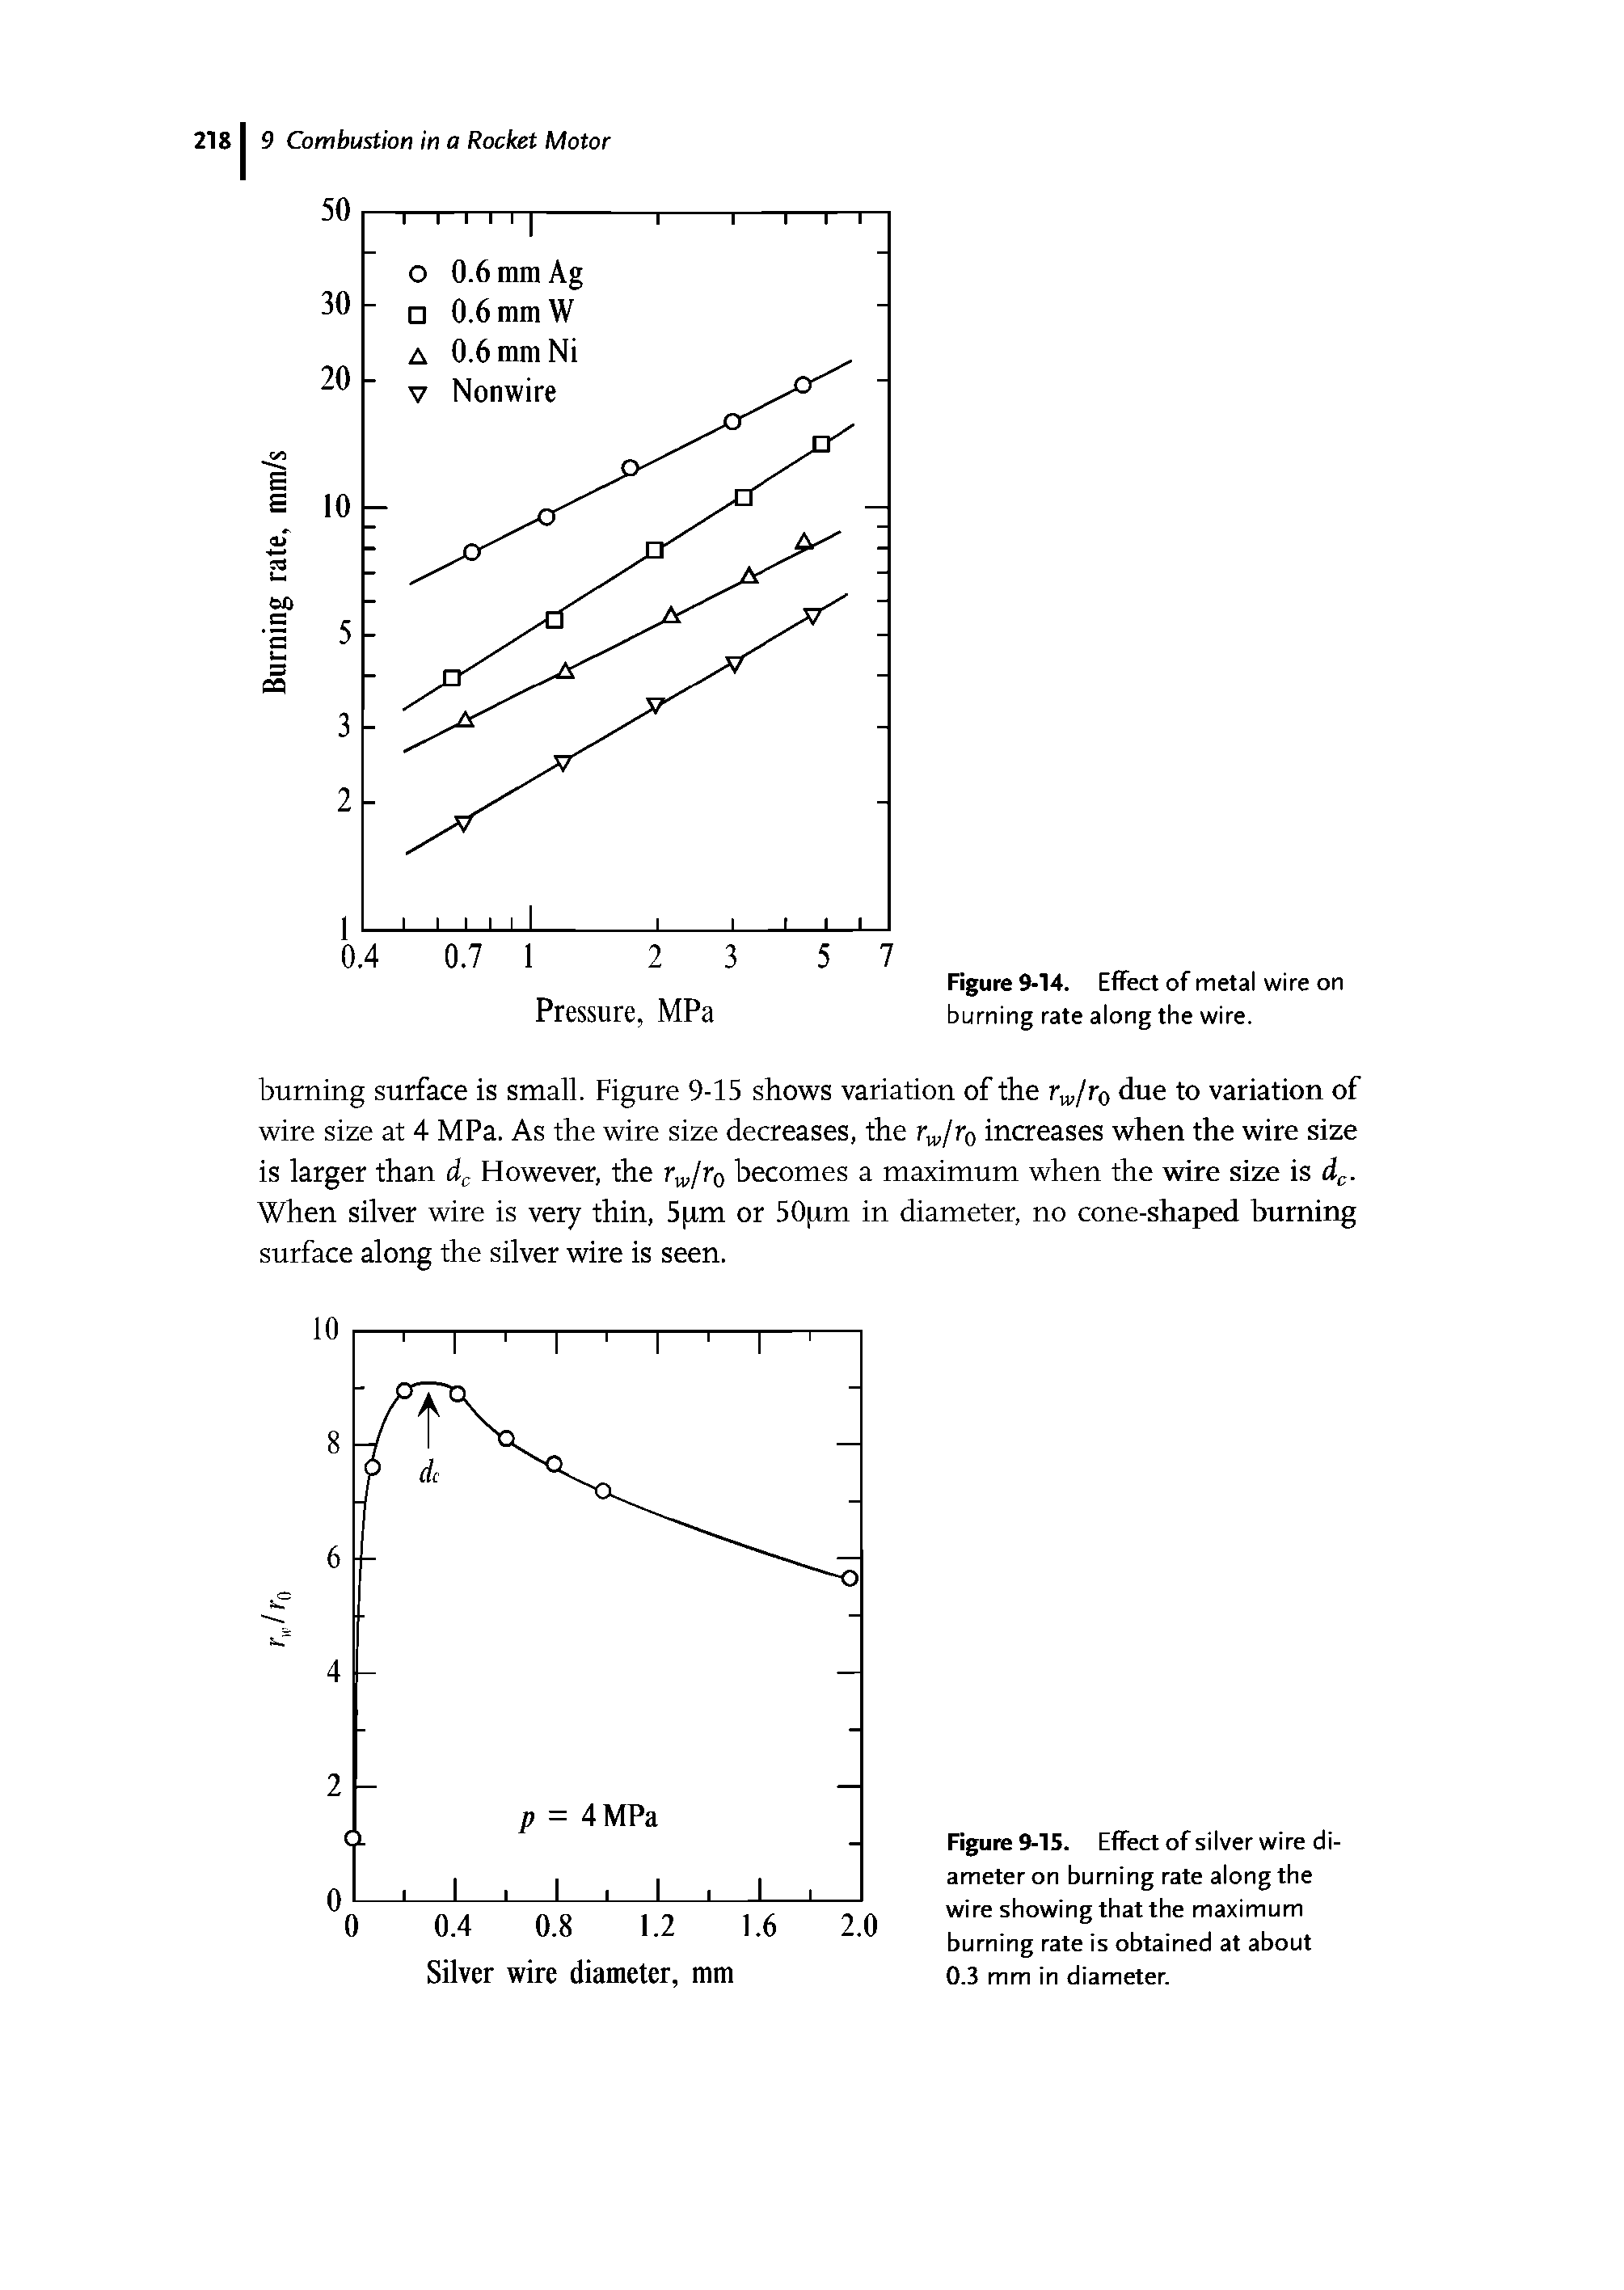 Figure 9-14. Effect of metal wire on Pressure, MPa burning rate along the wire.